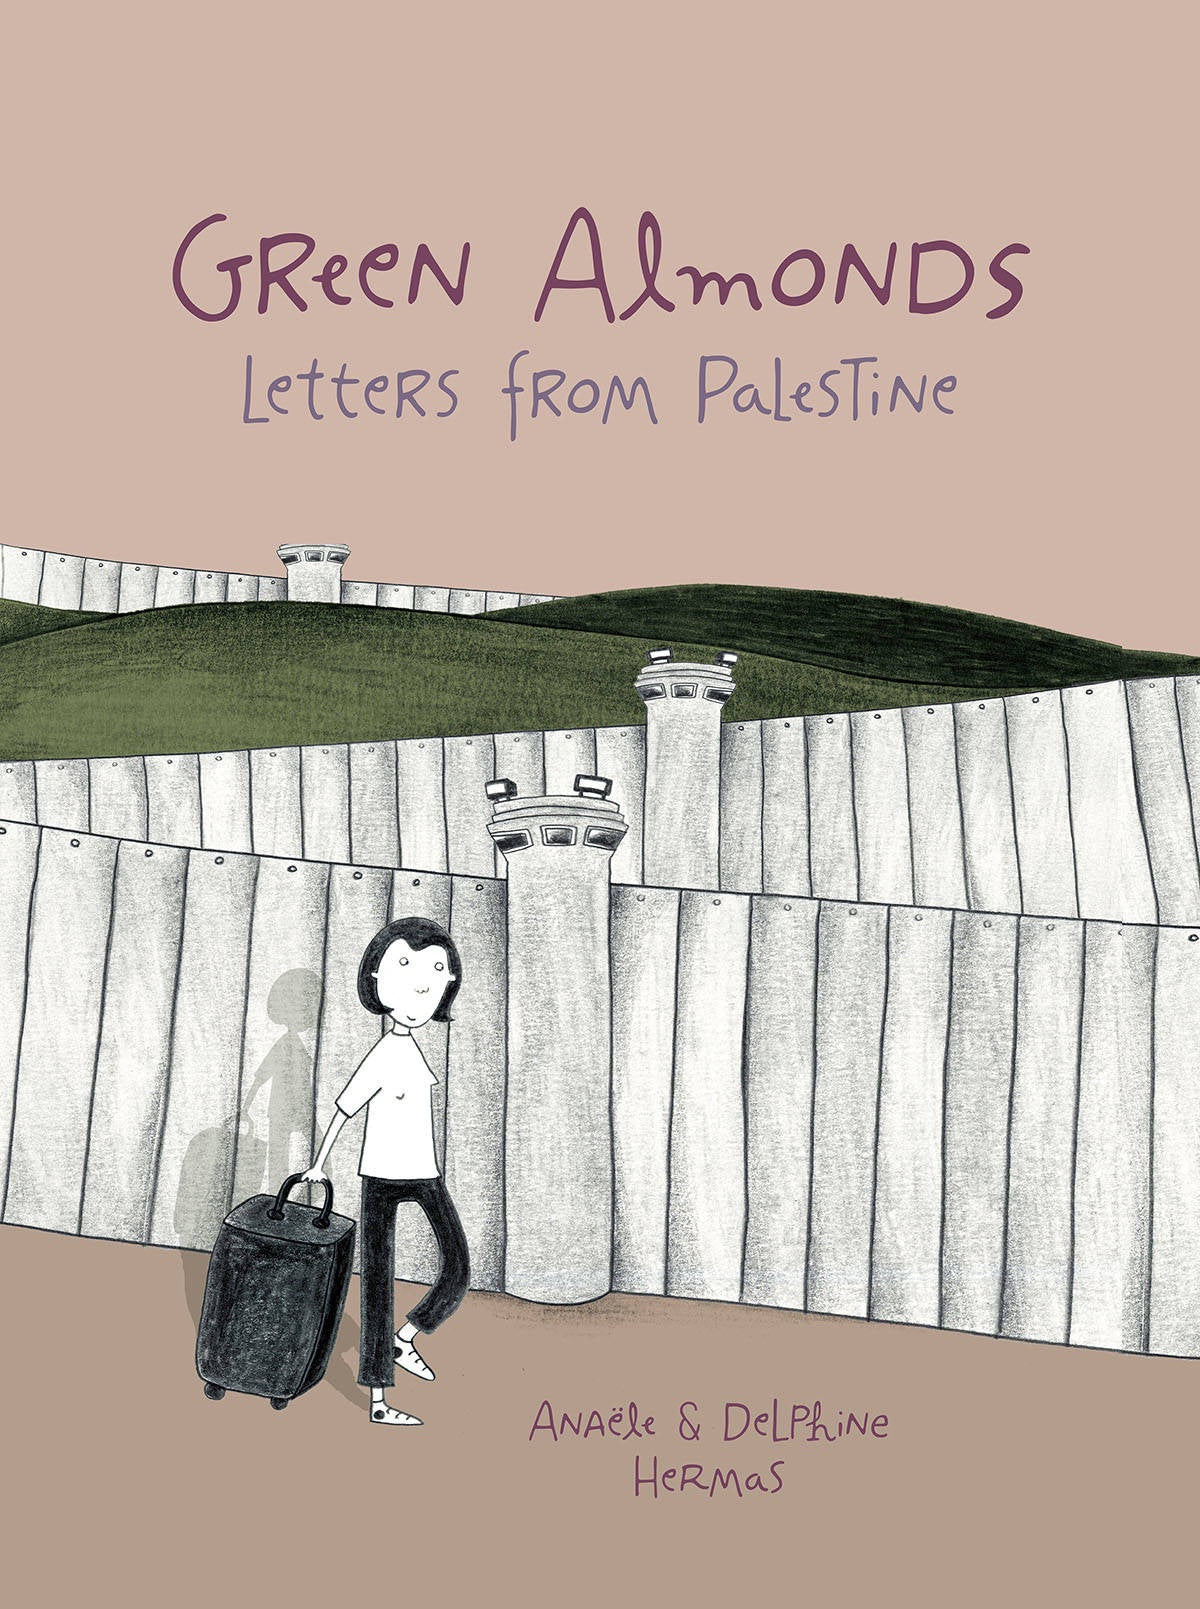 GREEN ALMONDS LETTERS FROM PALESTINE